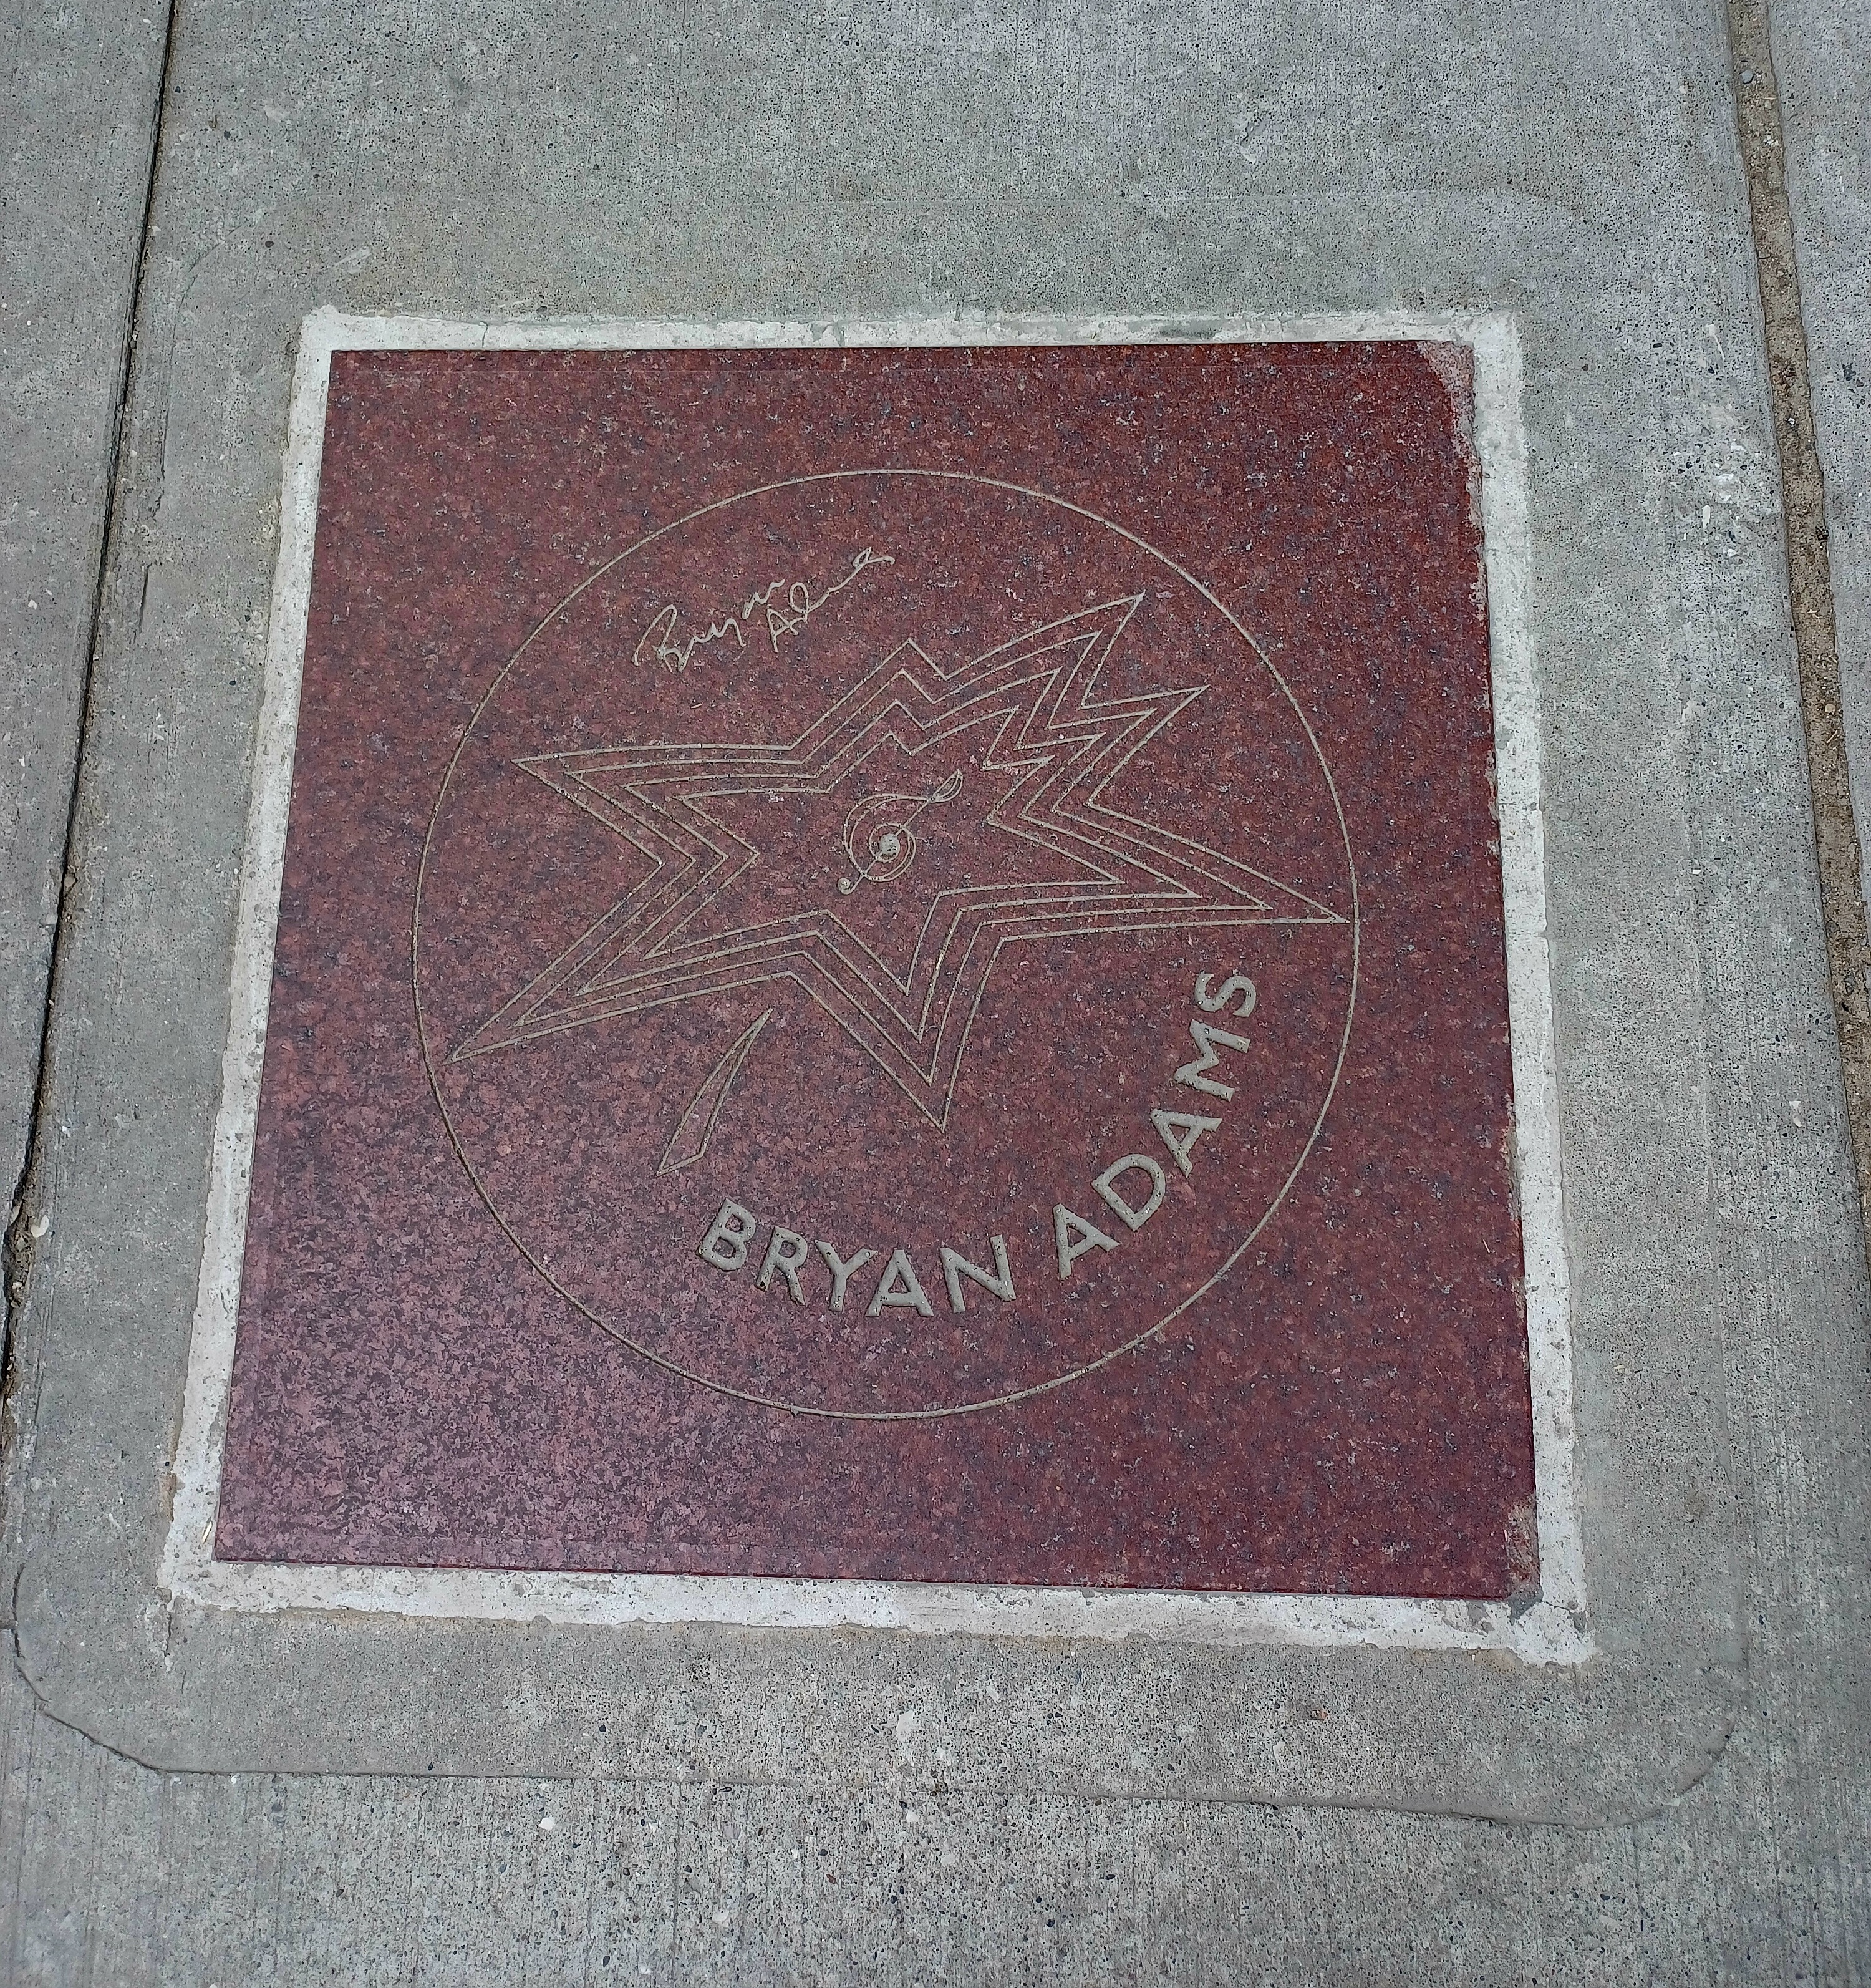 A red star shaped like a maple leaf, that says "Bryan Adams".